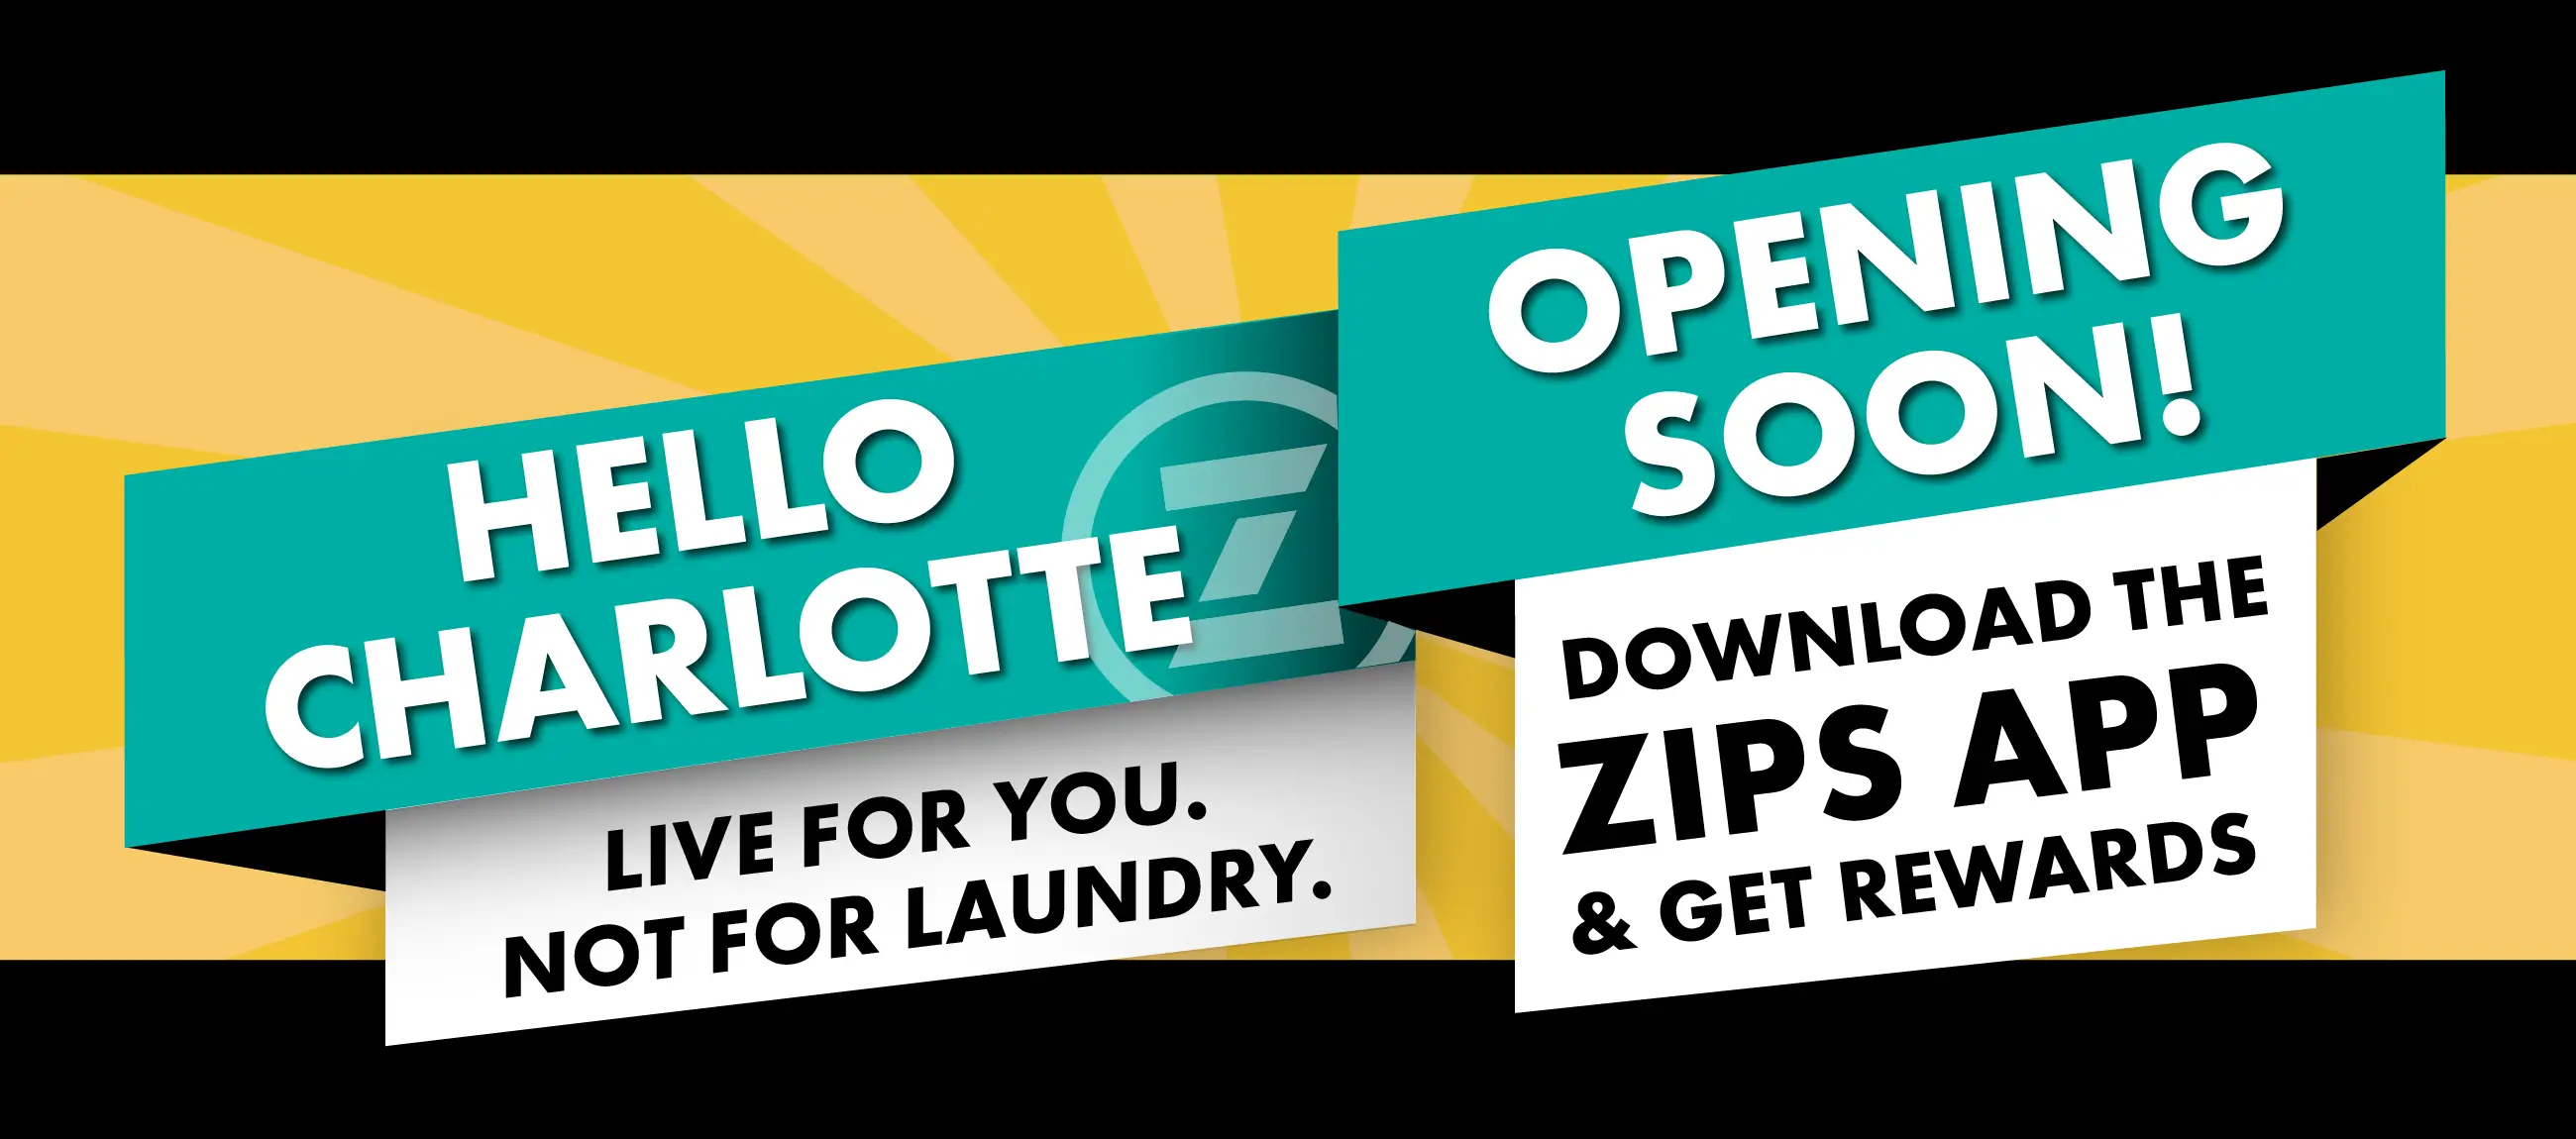 HELLO CHARLOTTE. OPENING SOON! LIVE FOR YOU NOT FOR LAUNDRY. DOWNLOAD THE ZIPS APP & GET REWARDS.